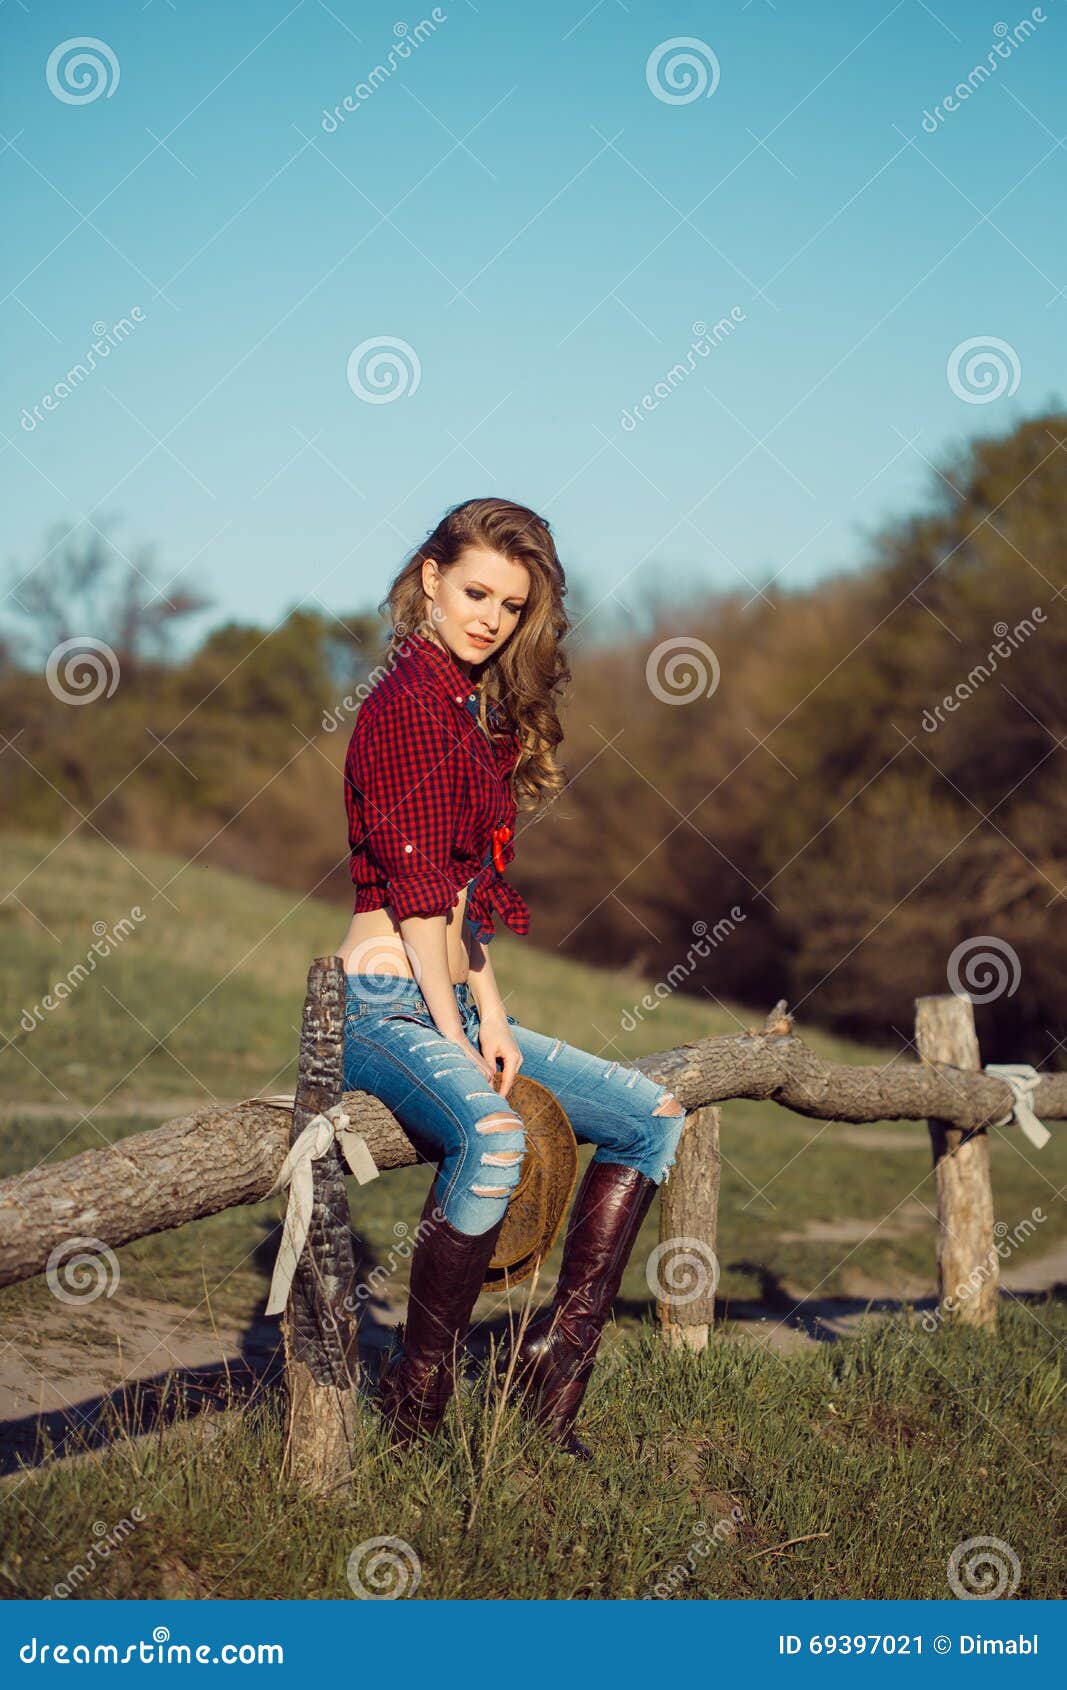 Girl with cowboy hat stock image. Image of casual, farmer - 69397021